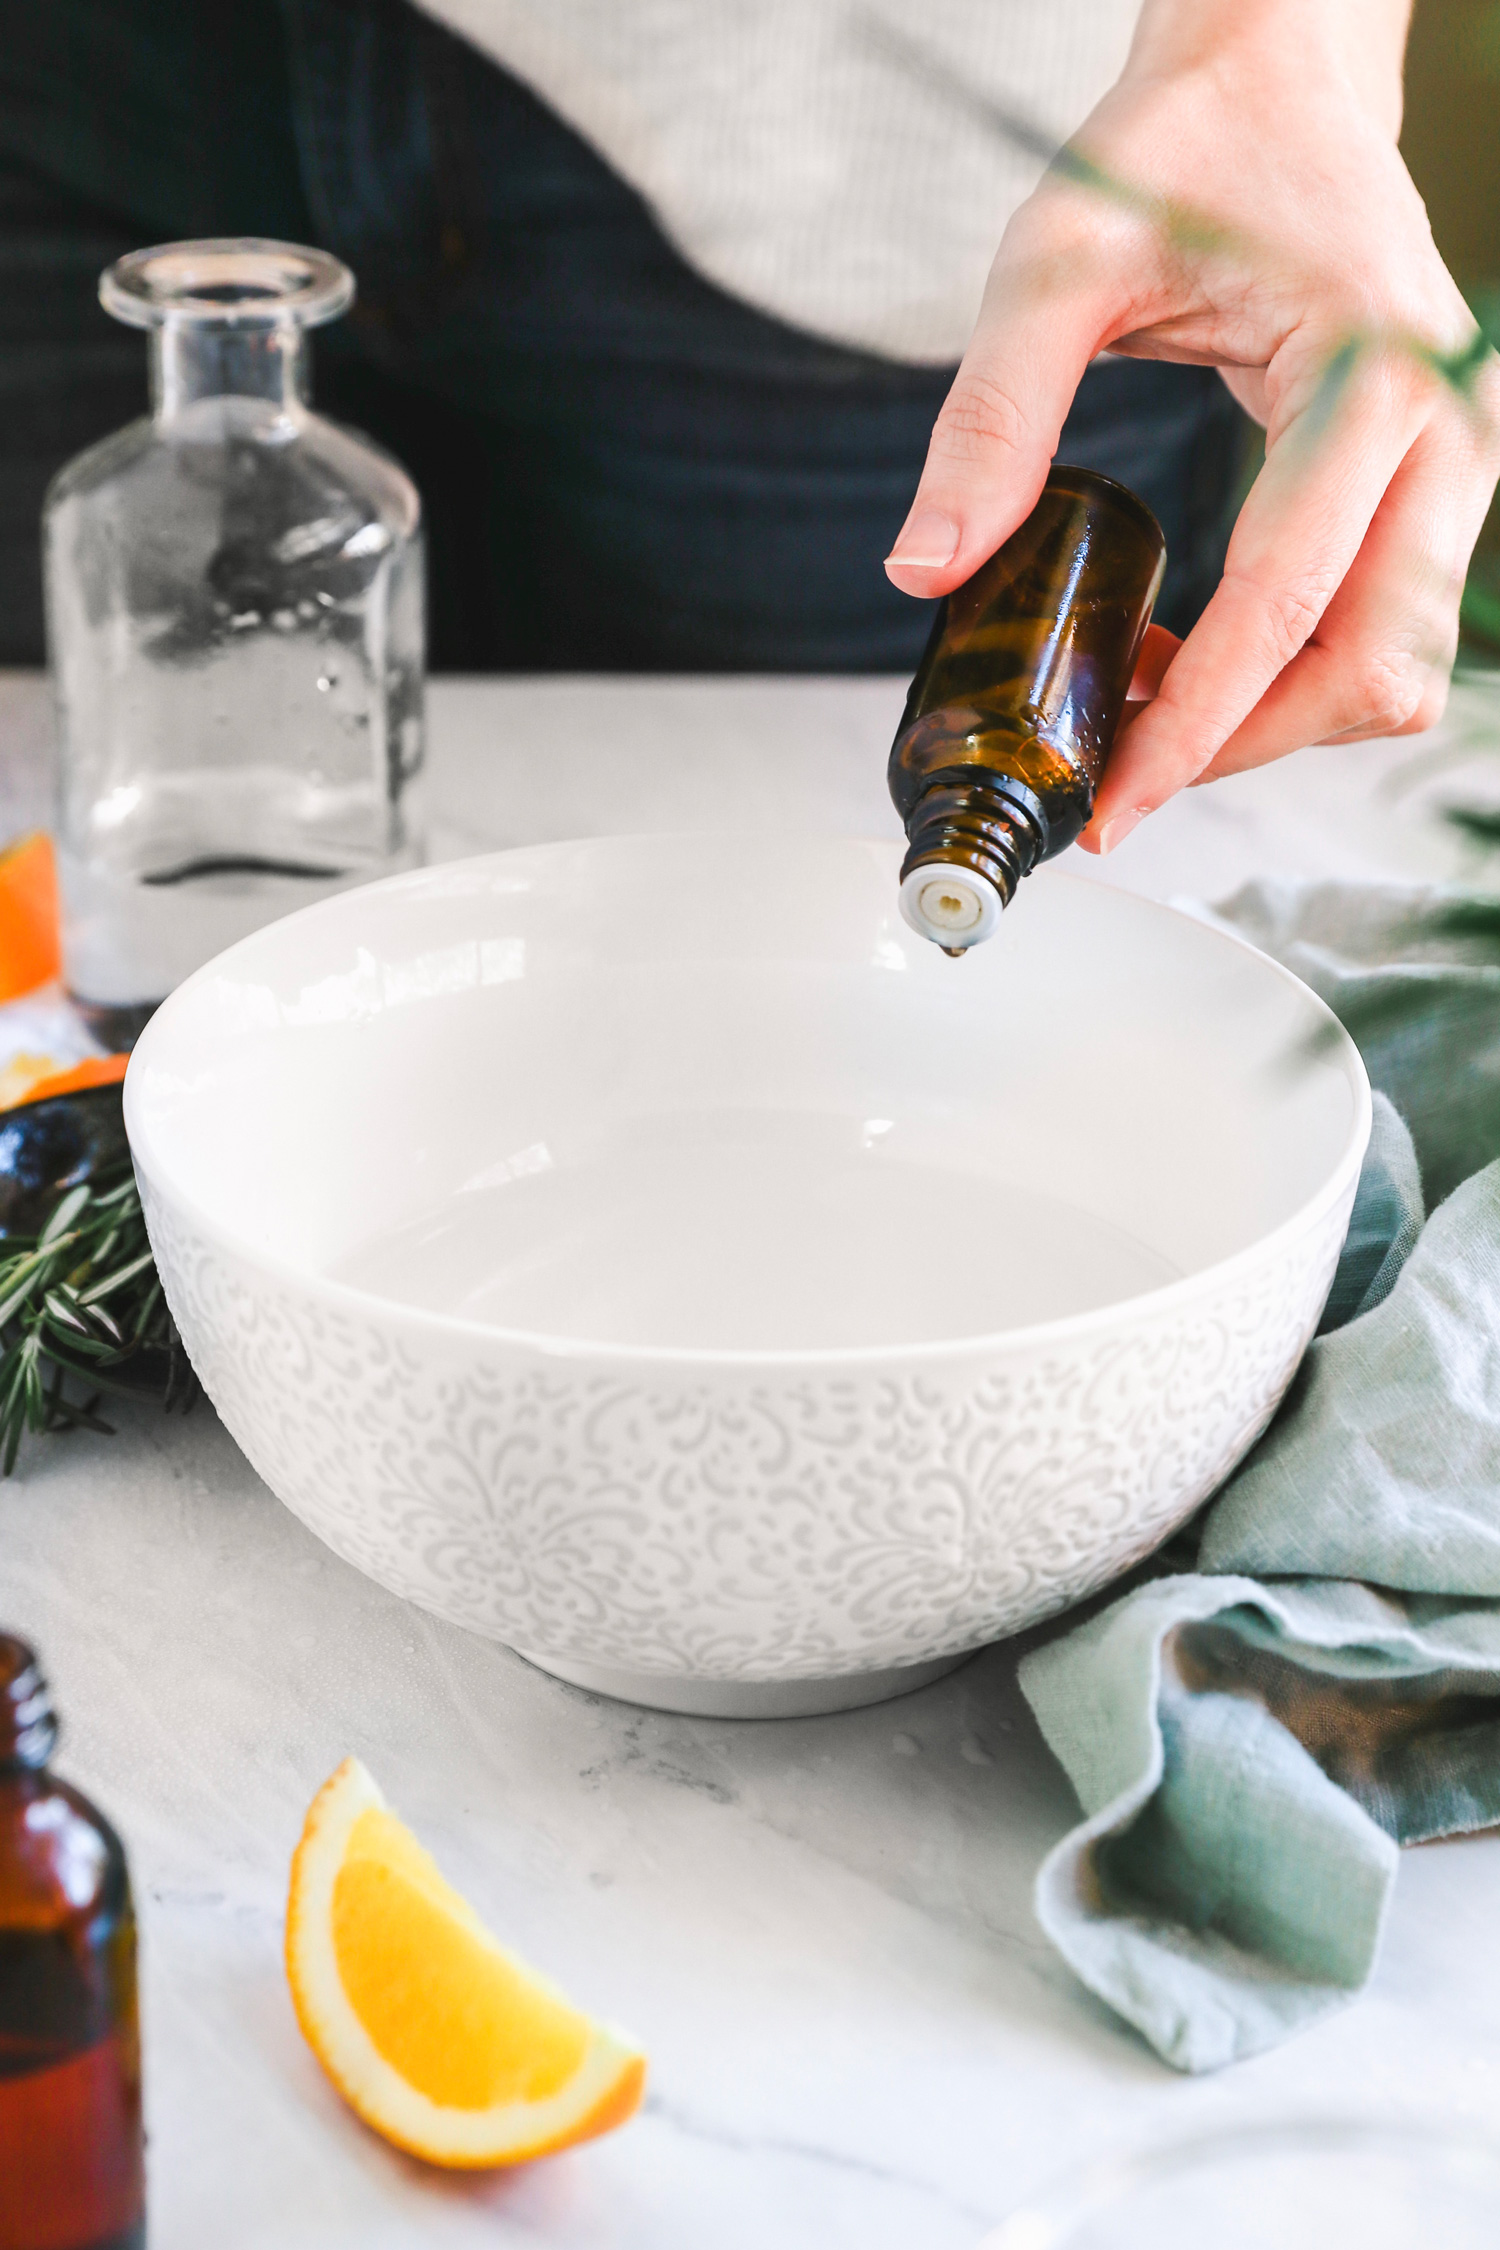 This DIY upholstery spray removes stubborn stains and refreshes furniture with the power of essential oil, vinegar, and rosemary.